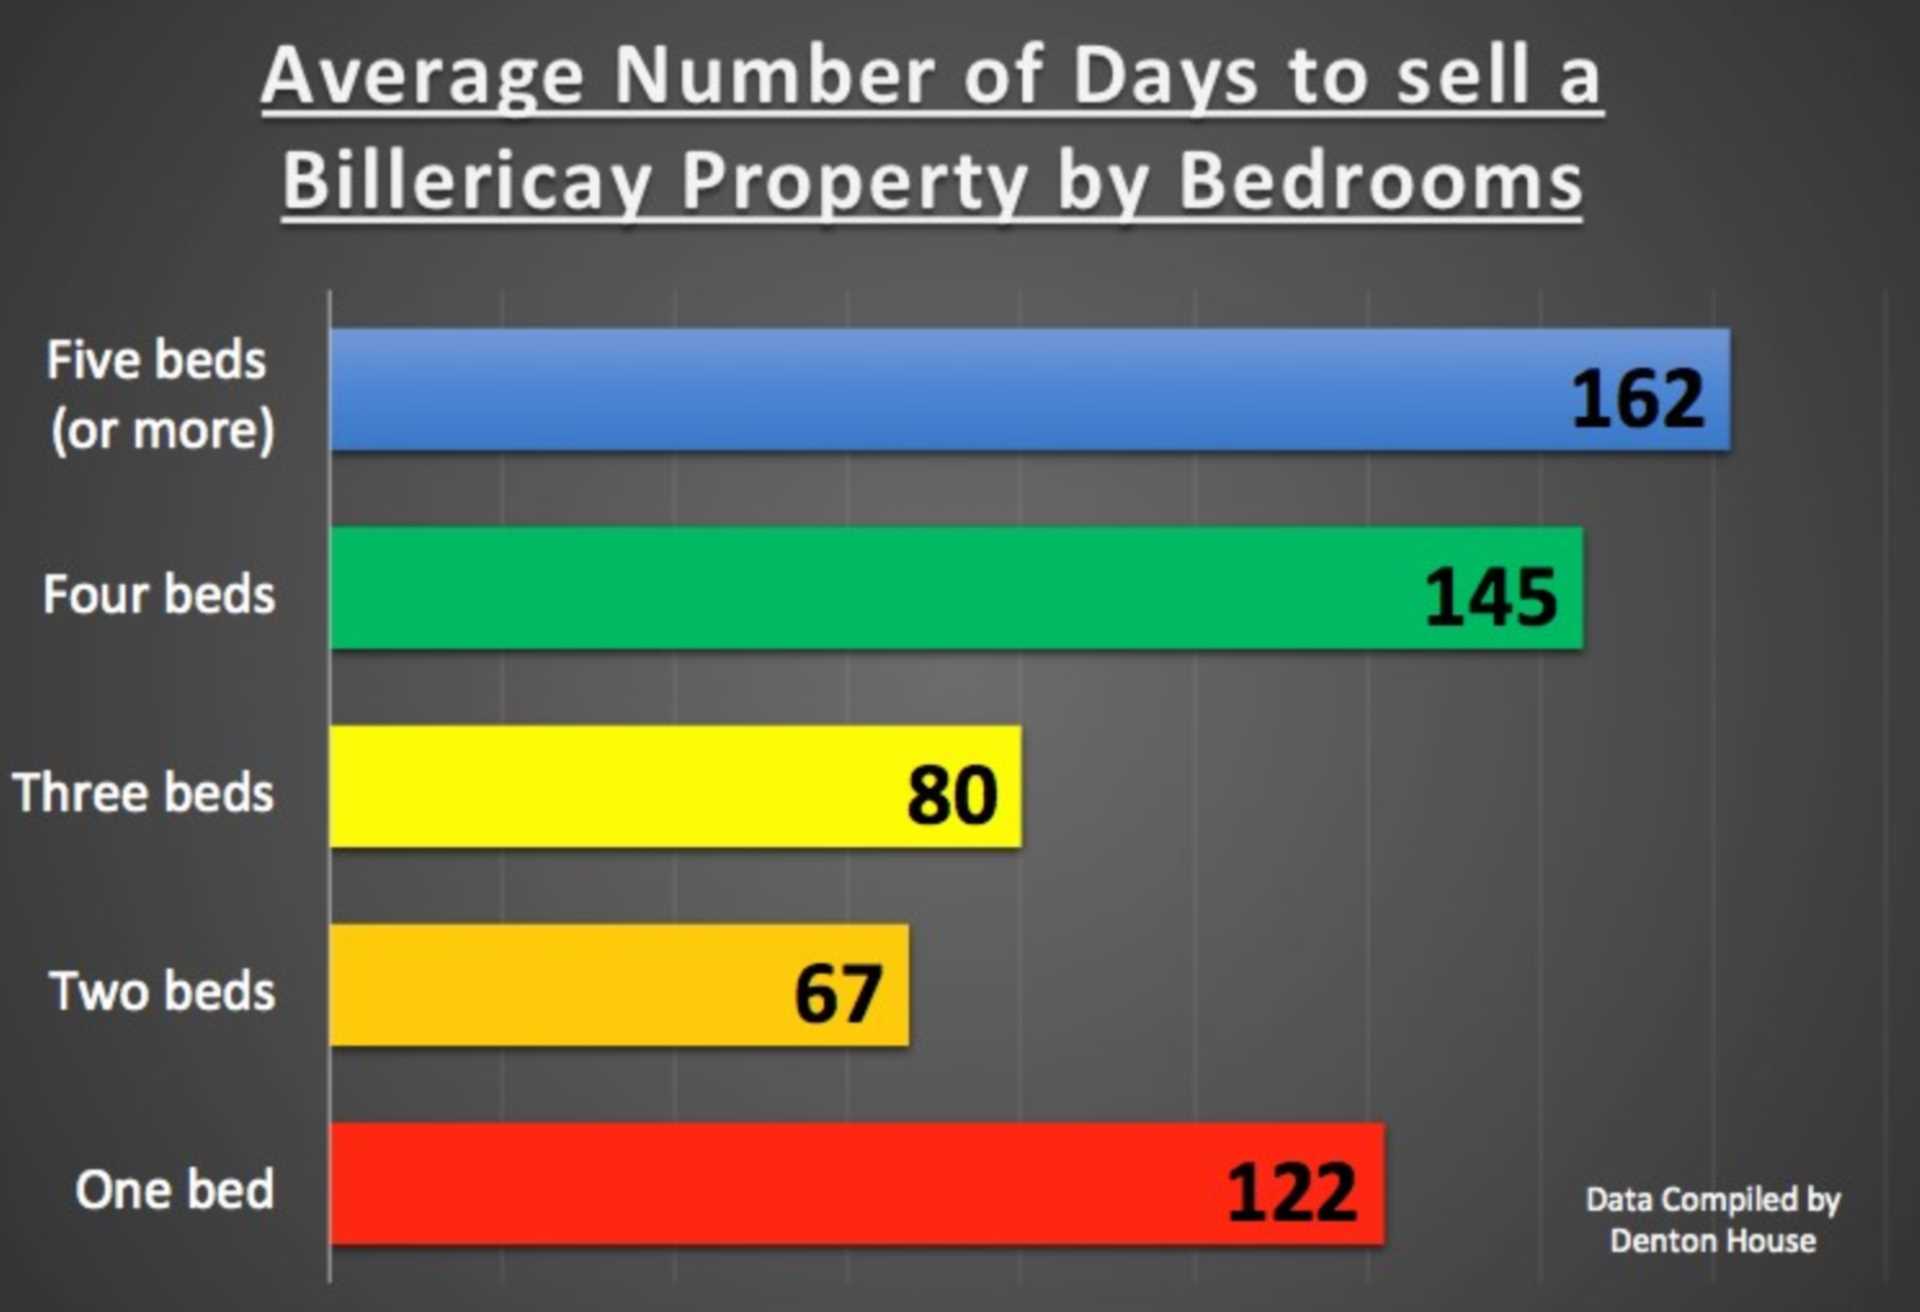 2 bed or 3 bed homes – Which Sell the Best in Billericay?